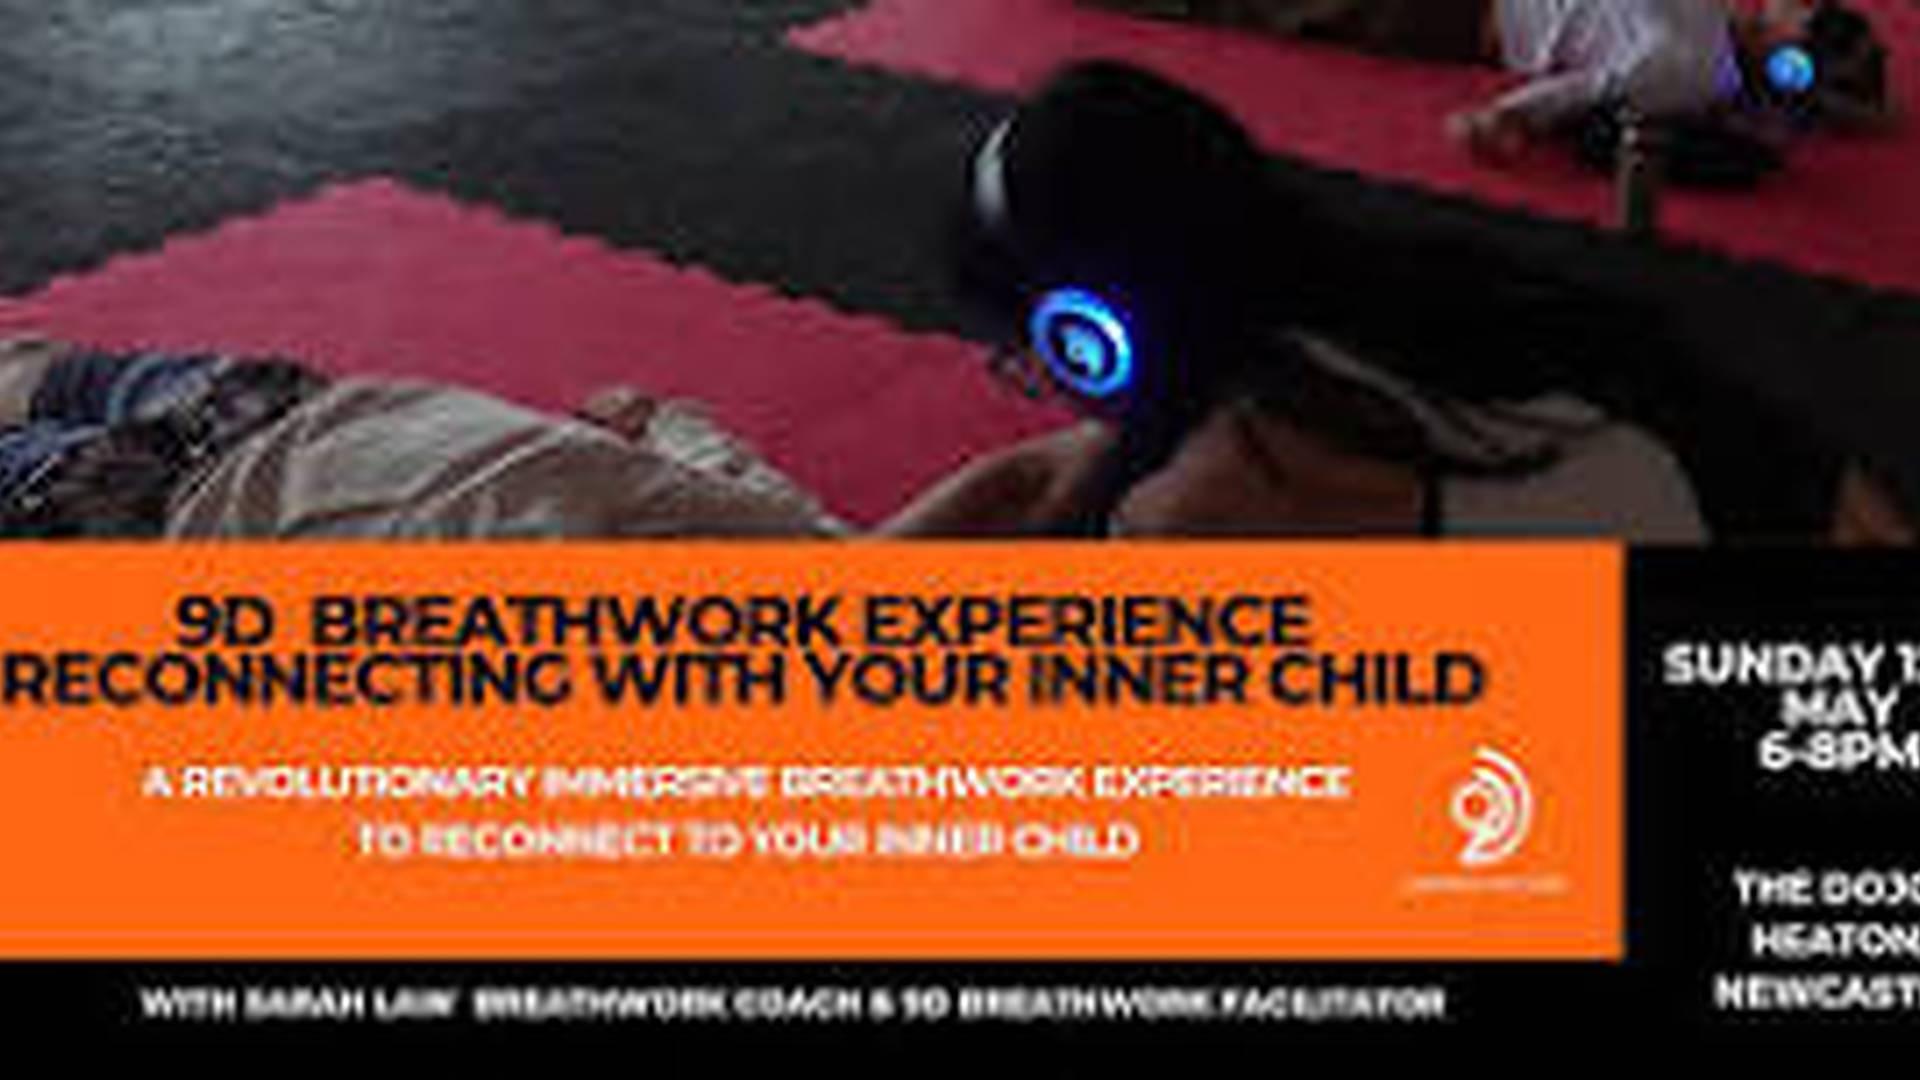 9D Immersive Breathwork Experience - Reconnecting with your Inner Child photo